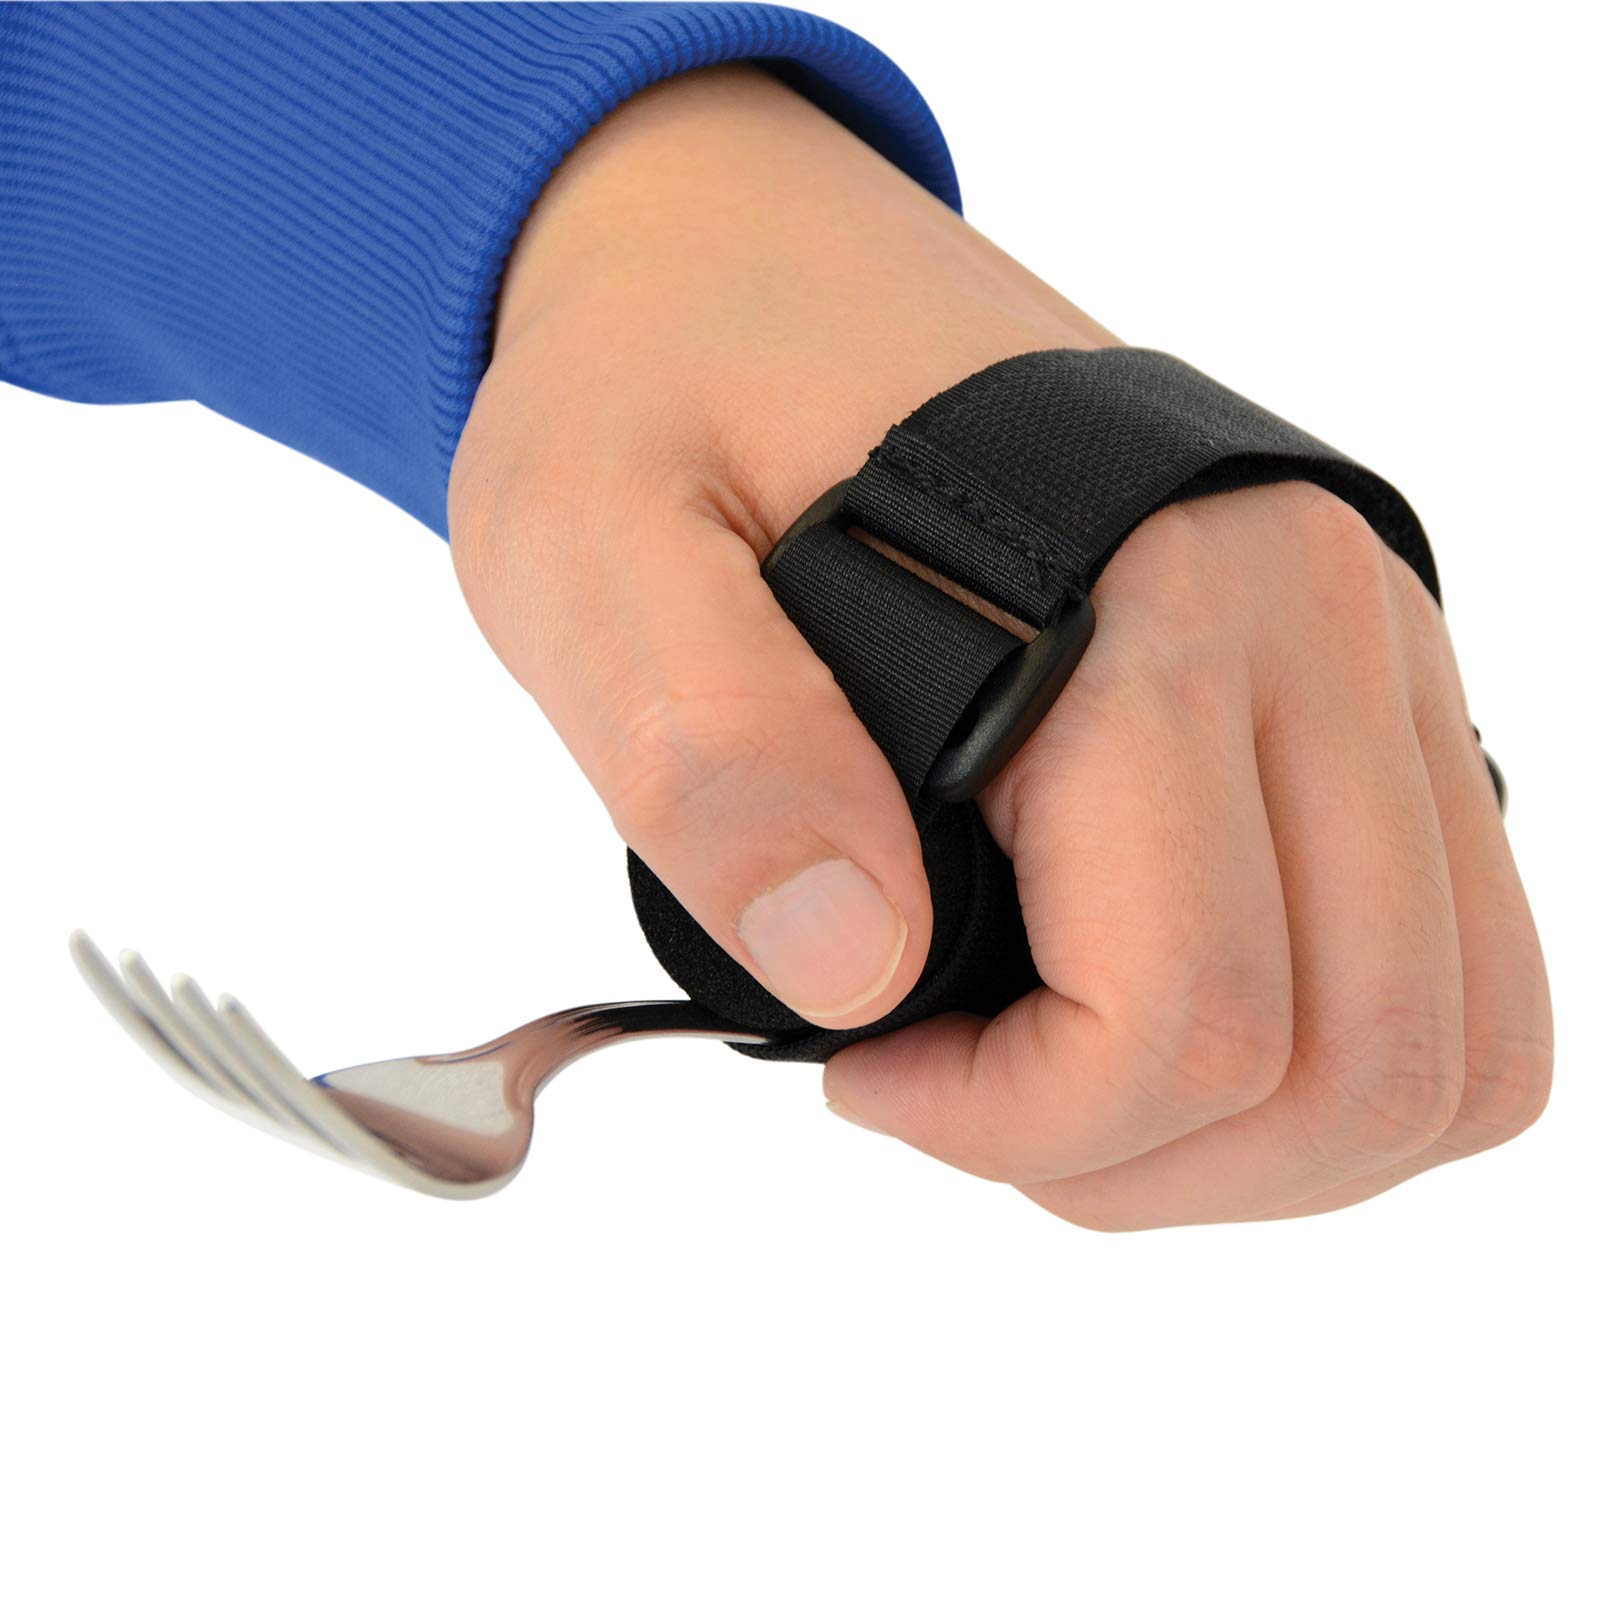 Sammons Preston Universal Holder Strap for Elderly, Hand Cuff with Pocket for Holding Cutlery, Pens, Toothbrushes, & Daily Living Tools, Adjustable Velcro Implement Holder for Weak Grip and Arthritis